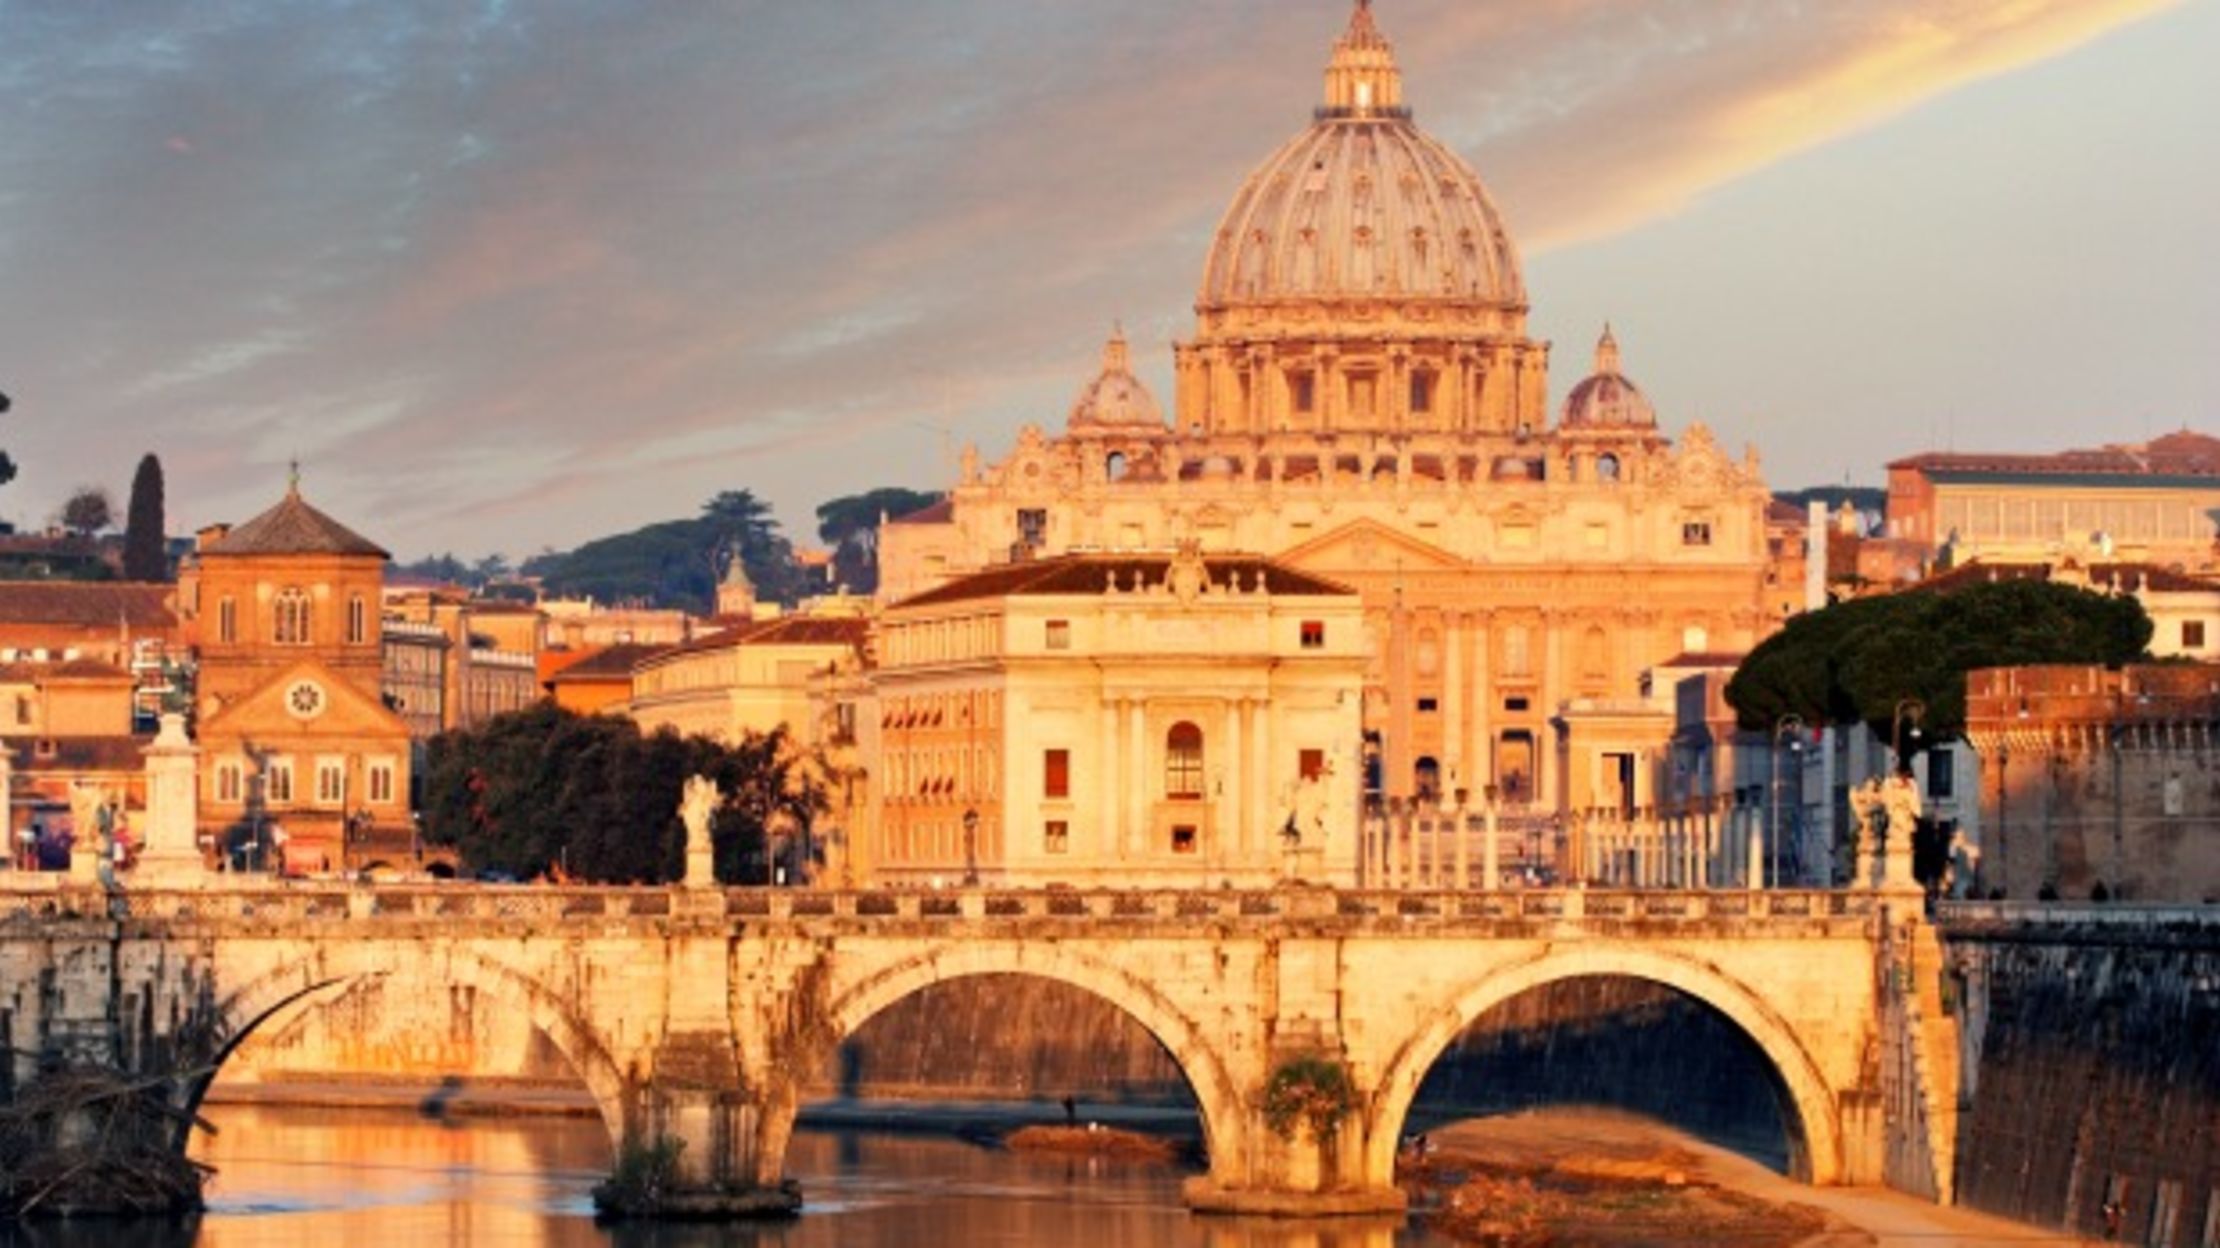 10 Facts About St. Peter's Basilica Mental Floss